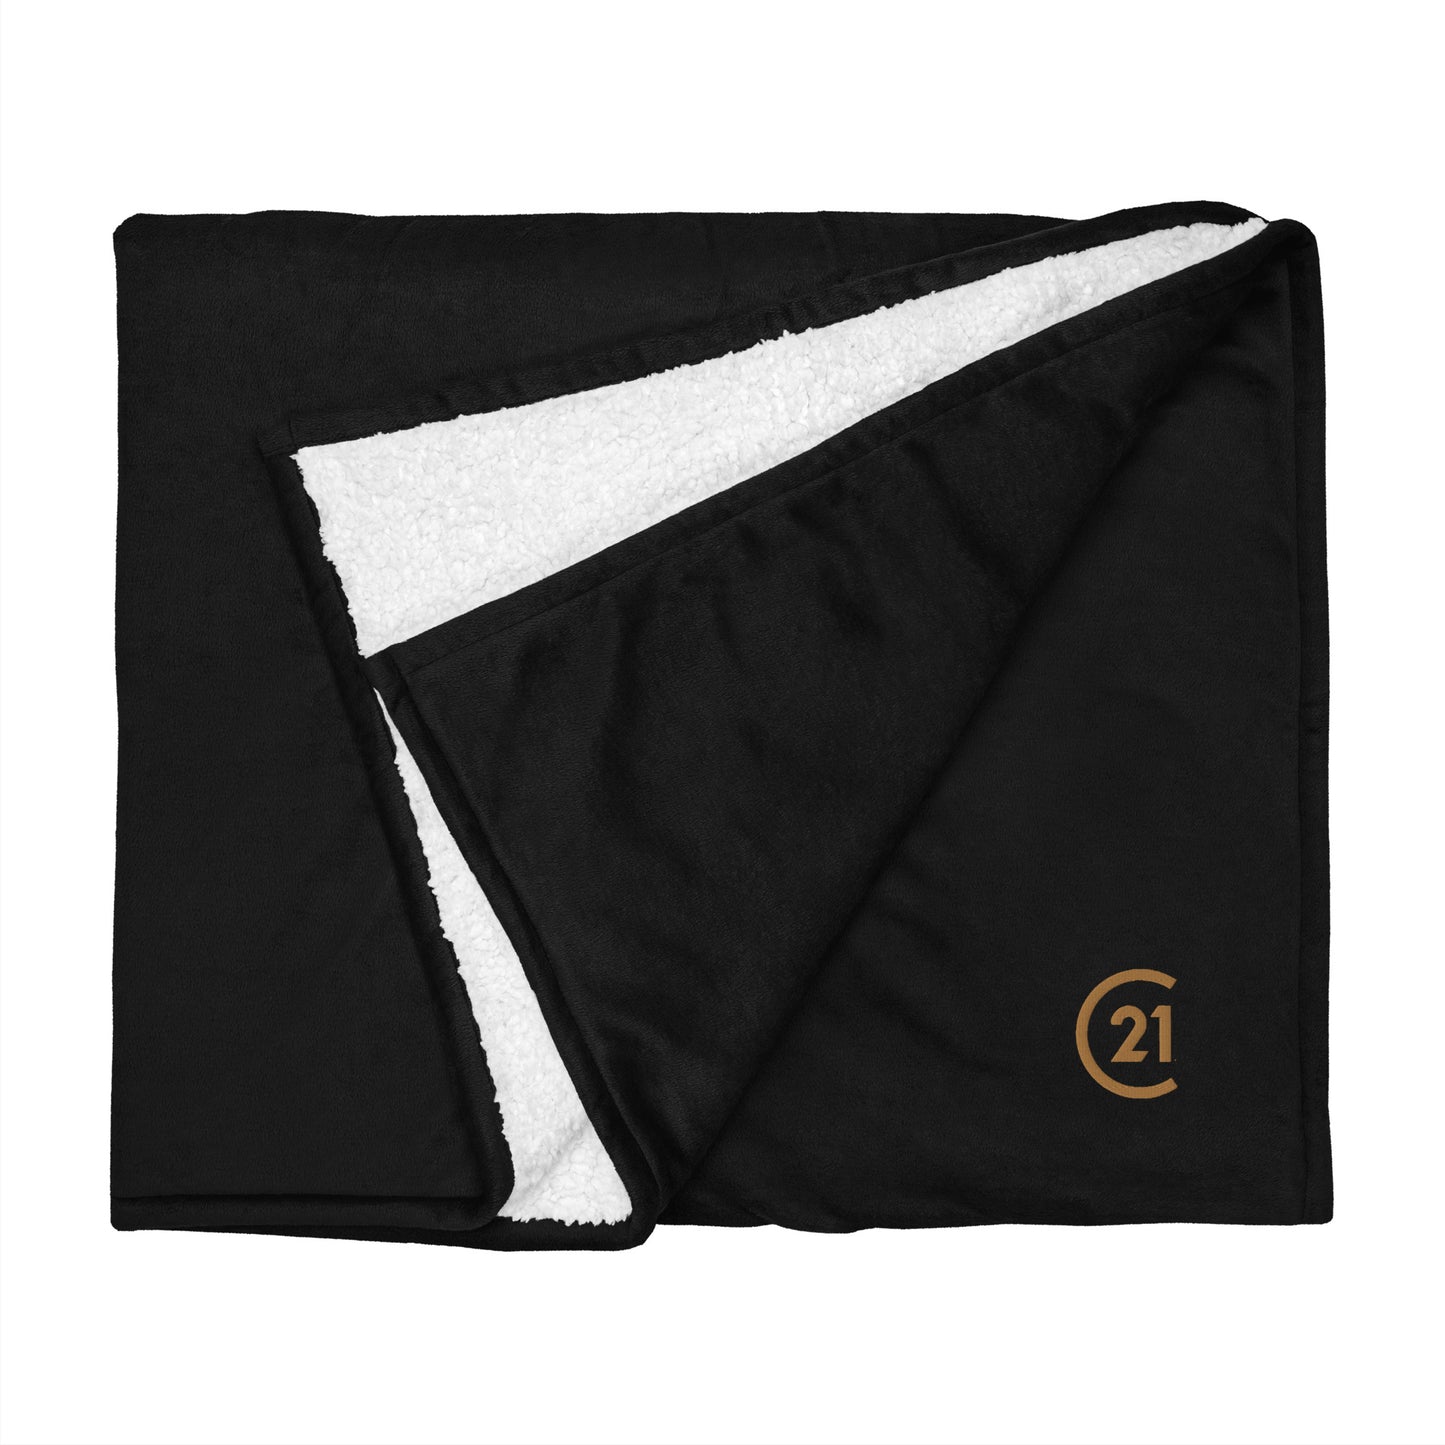 Century 21 Embroidered Premium sherpa blanket (from $$91 per complete box)